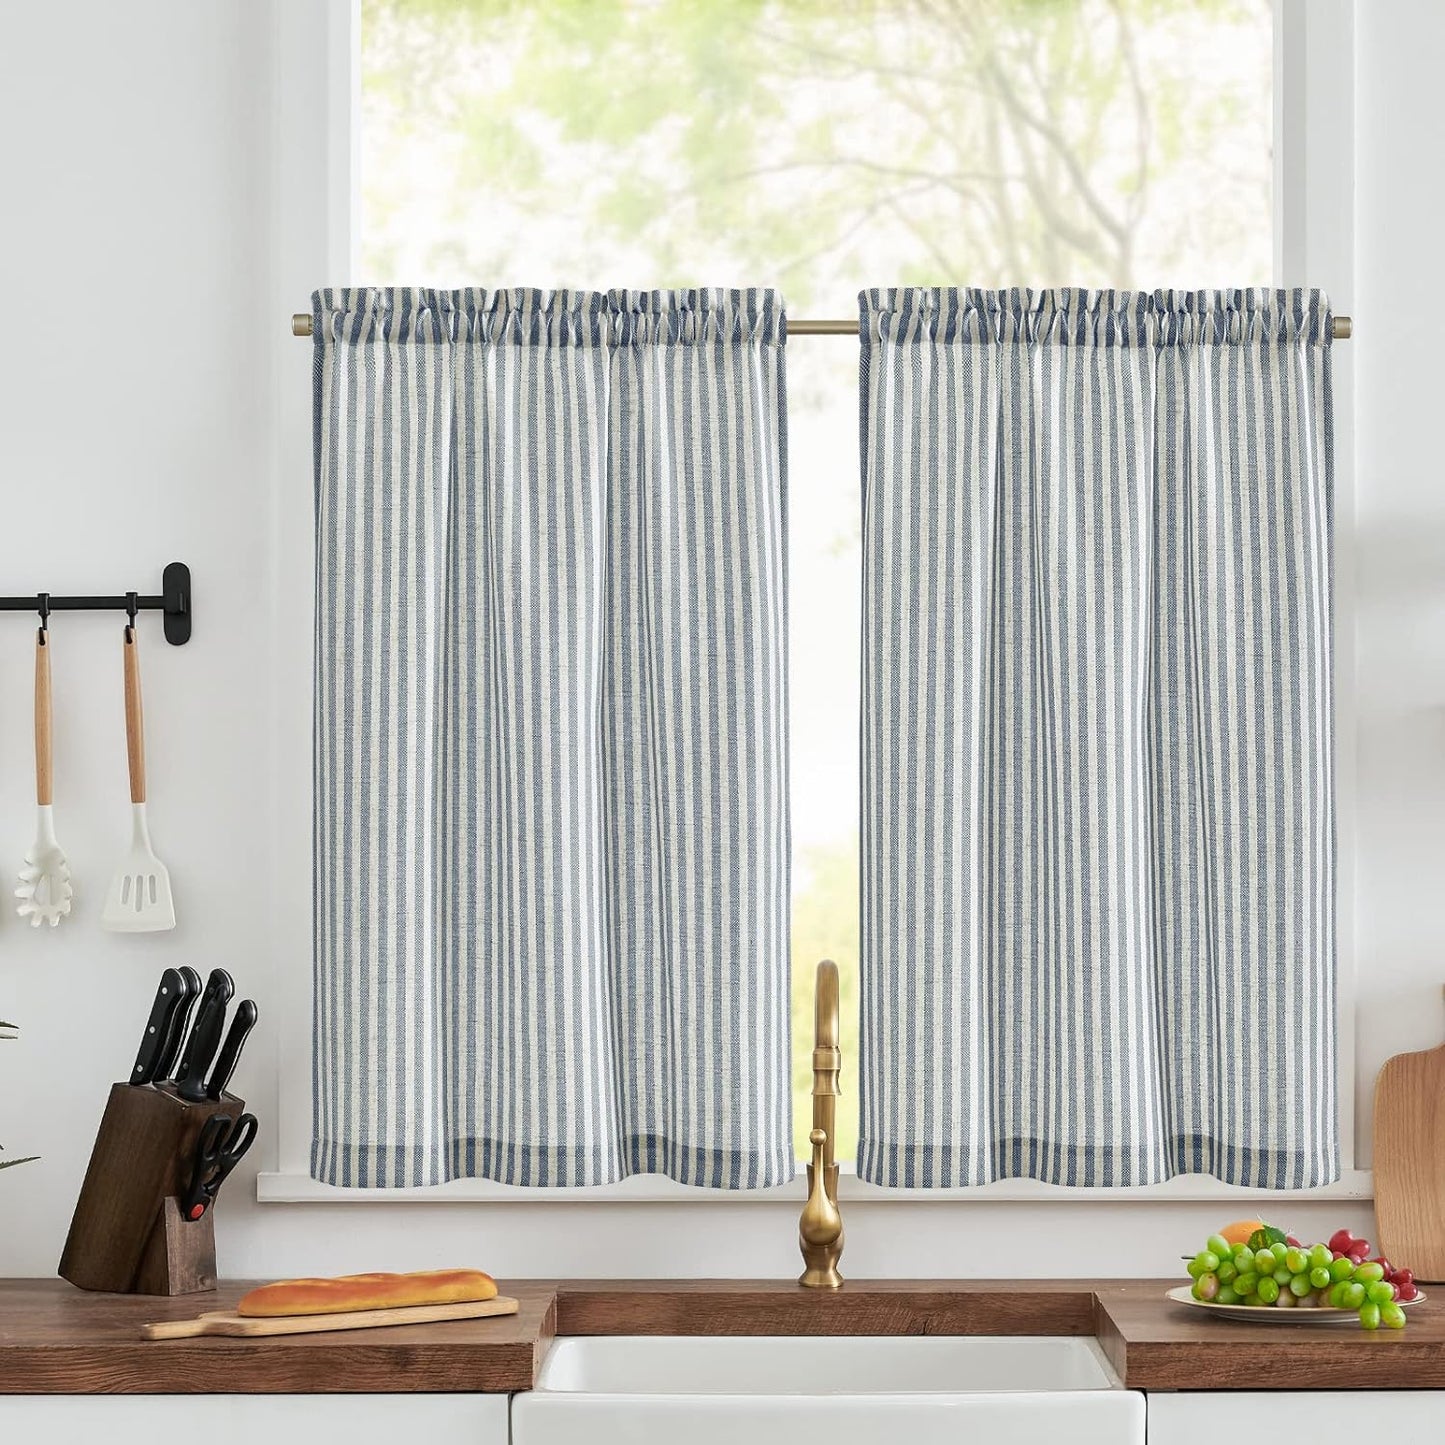 Jinchan Kitchen Curtains Striped Tier Curtains Ticking Stripe Linen Curtains Pinstripe Cafe Curtains 24 Inch Length for Living Room Bathroom Farmhouse Curtains Rod Pocket 2 Panels Black on Beige  CKNY HOME FASHION Rod Pocket Striped Blue W26 X L45 